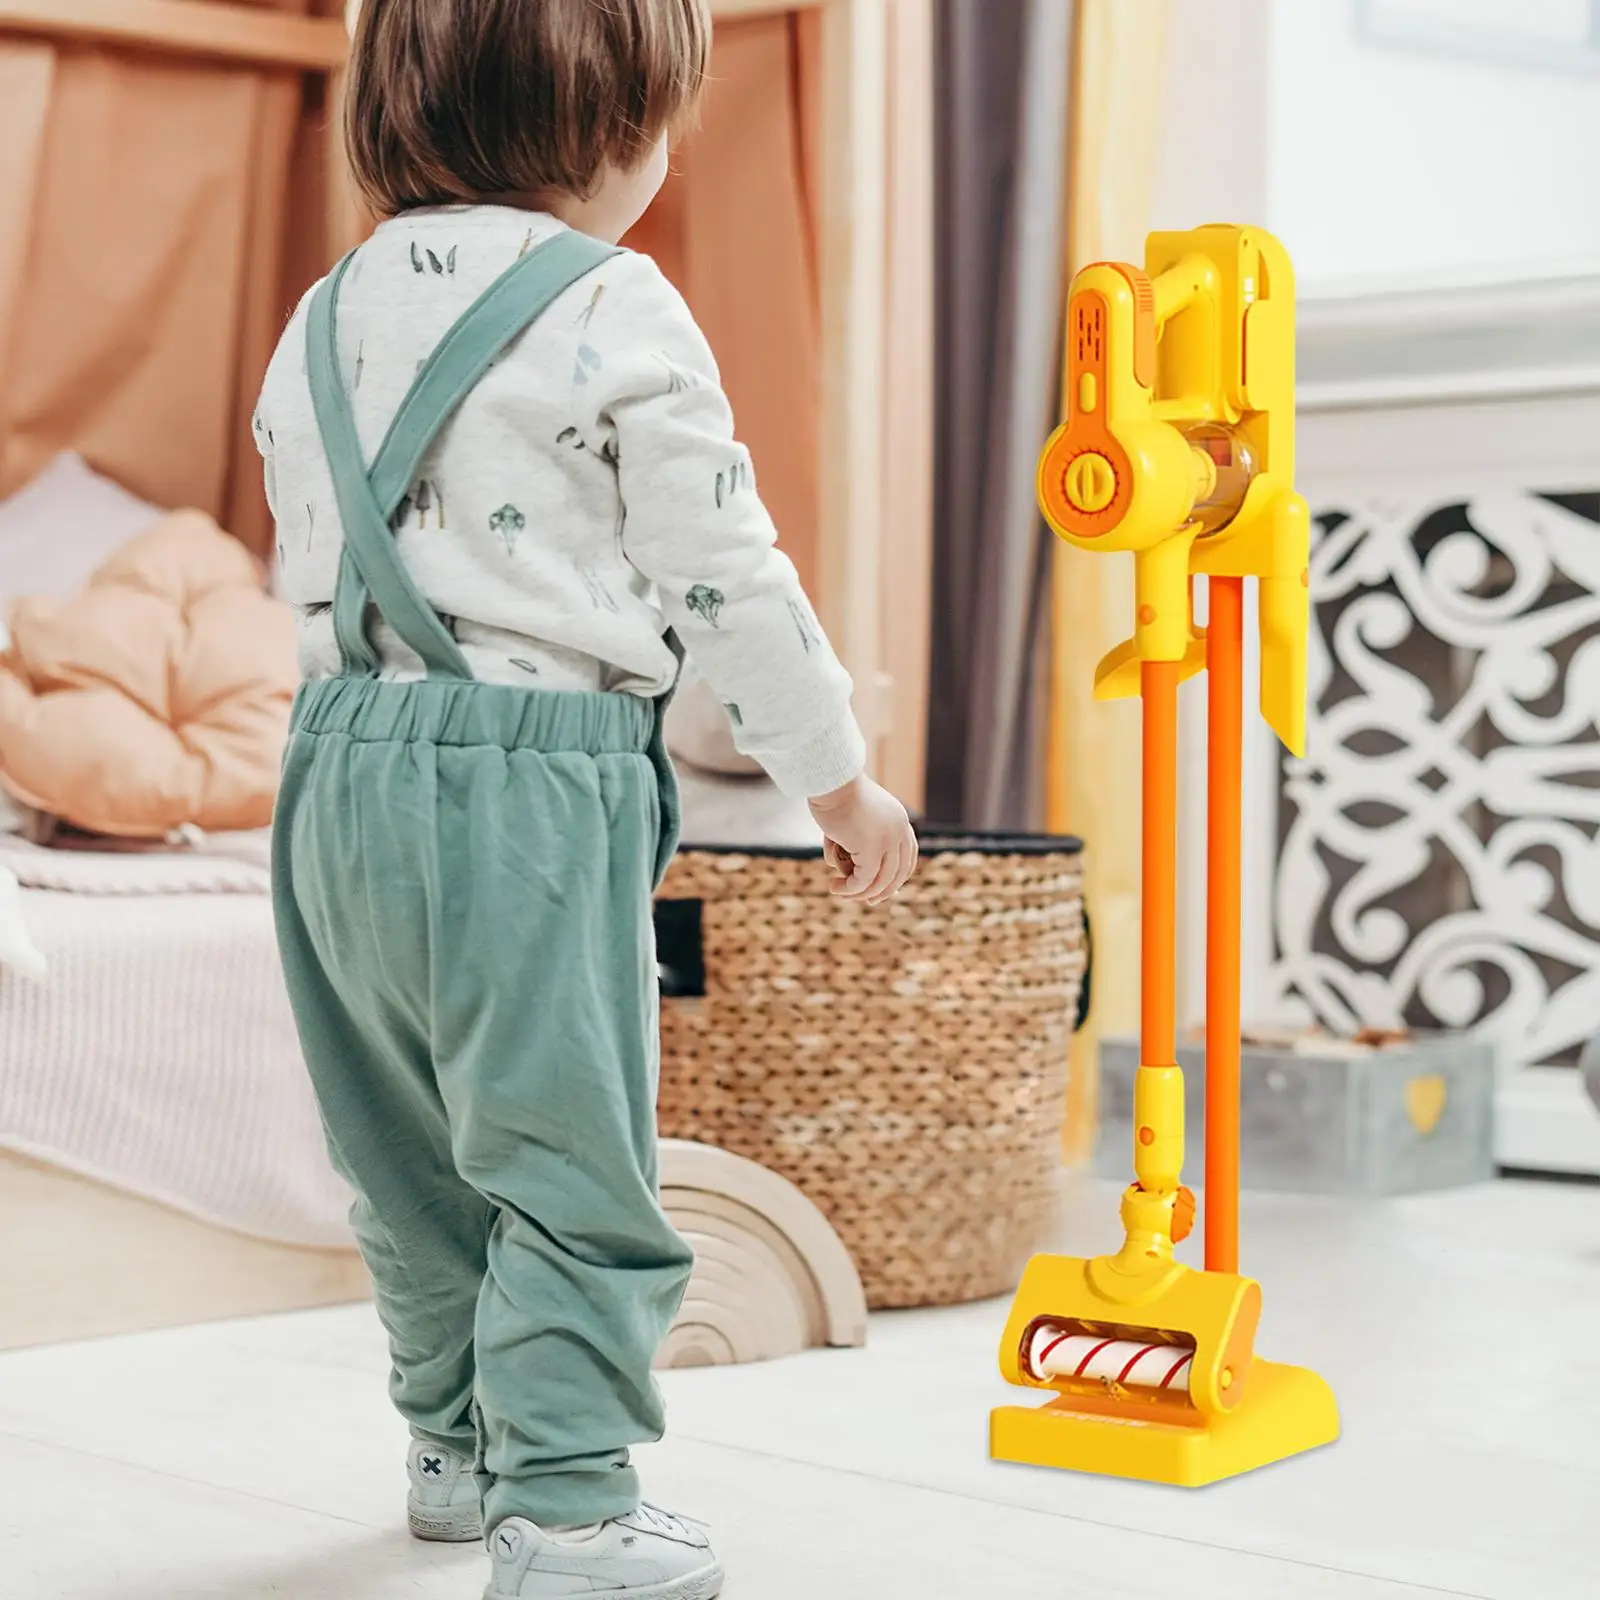 Kids Vacuum Cleaner Toy house Cleaning Toy for Girls Kids Children